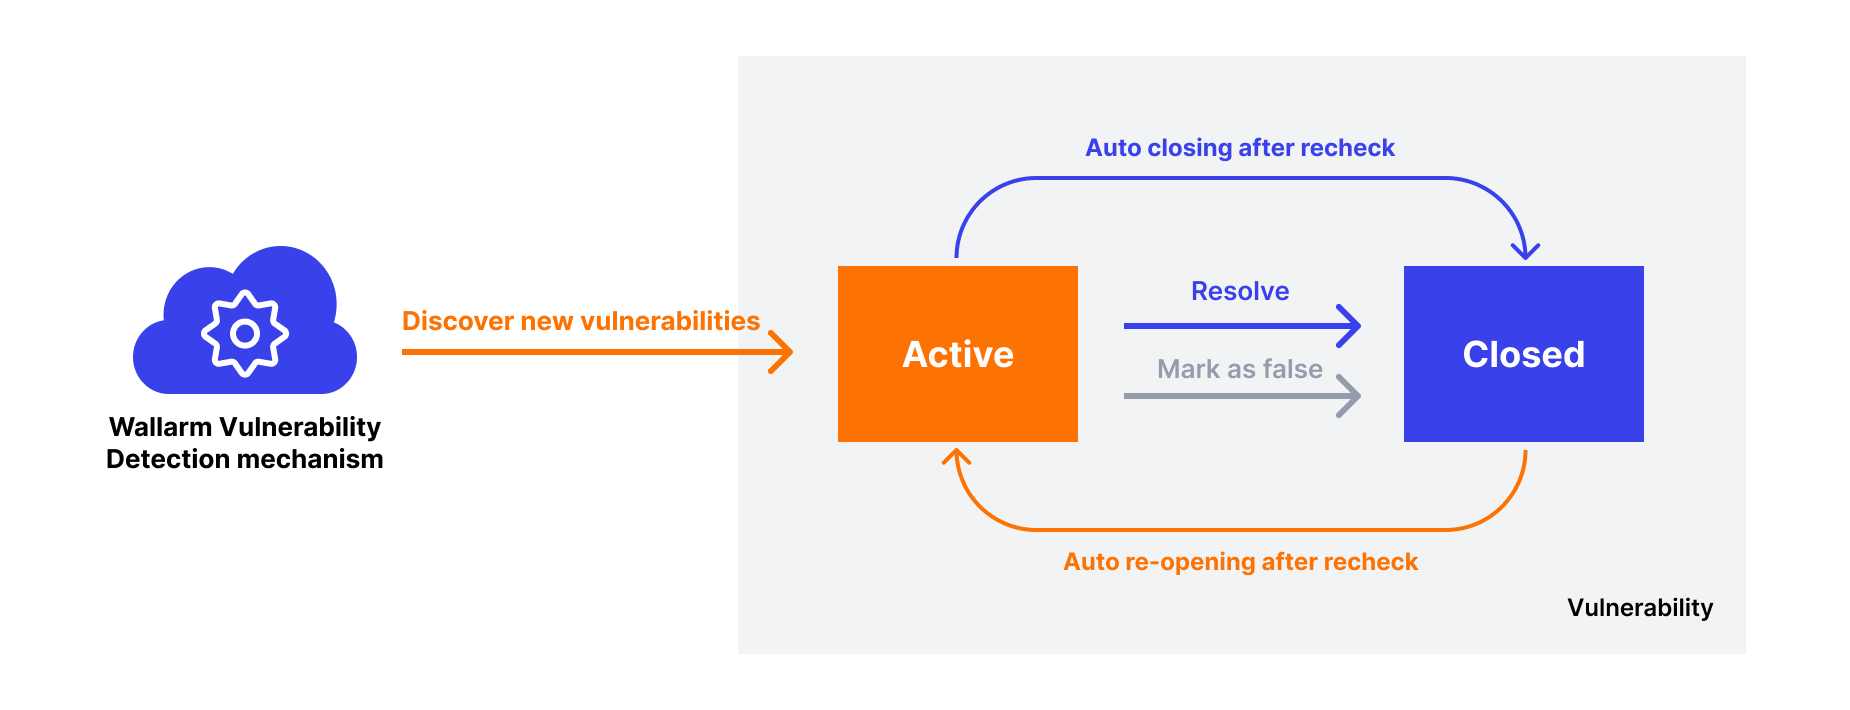 Vulnerability lifecycle